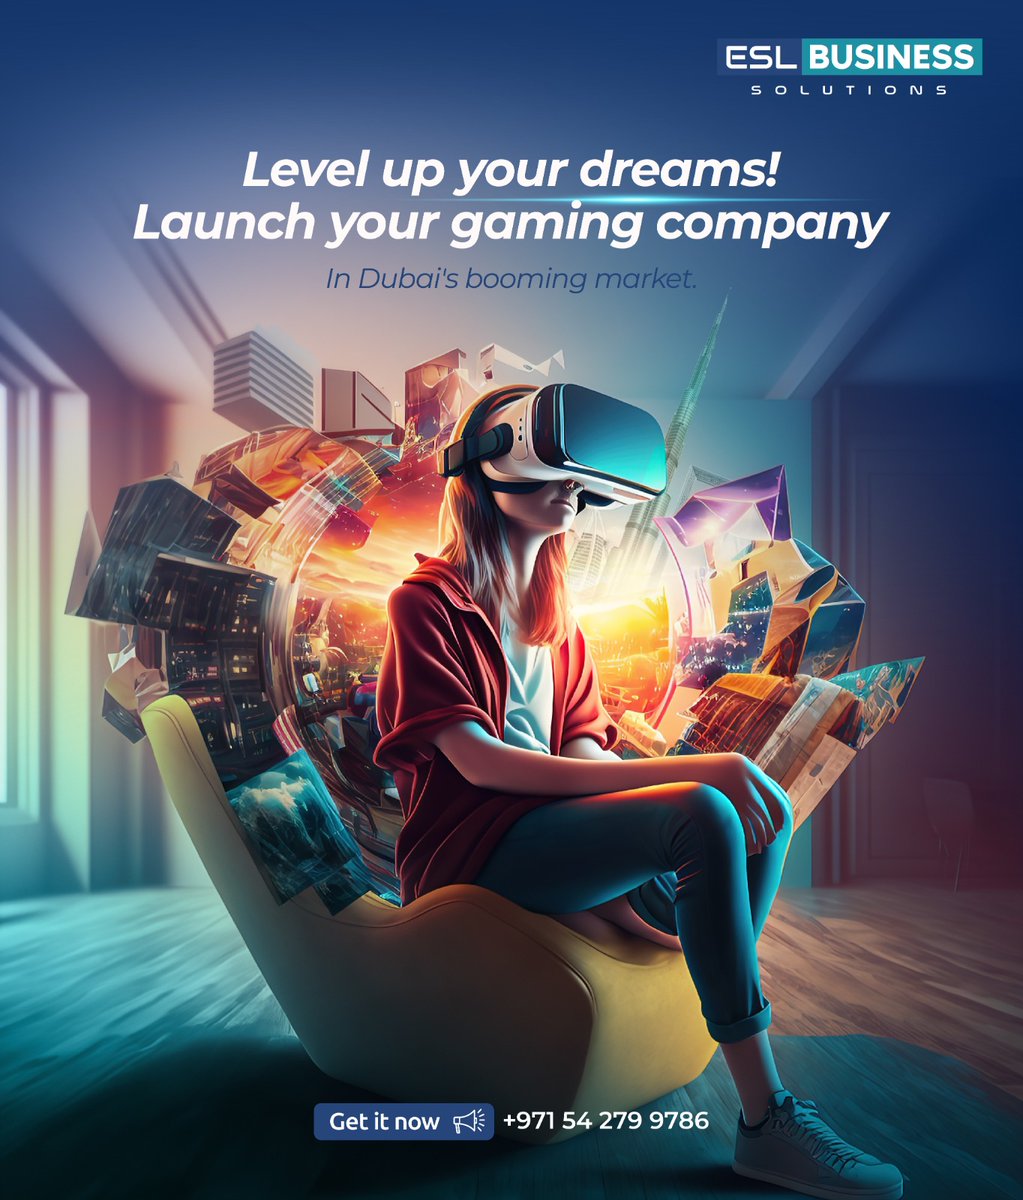 Ready to launch your gaming company in the UAE? 🚀 Look no further! ESL Business Solutions offers top-notch business setup services tailored for you.

Call: +971 54 279 9786
Mail: business@esluae.com
Visit: esluae.com

#GamingStartup #UAE #BusinessSetup